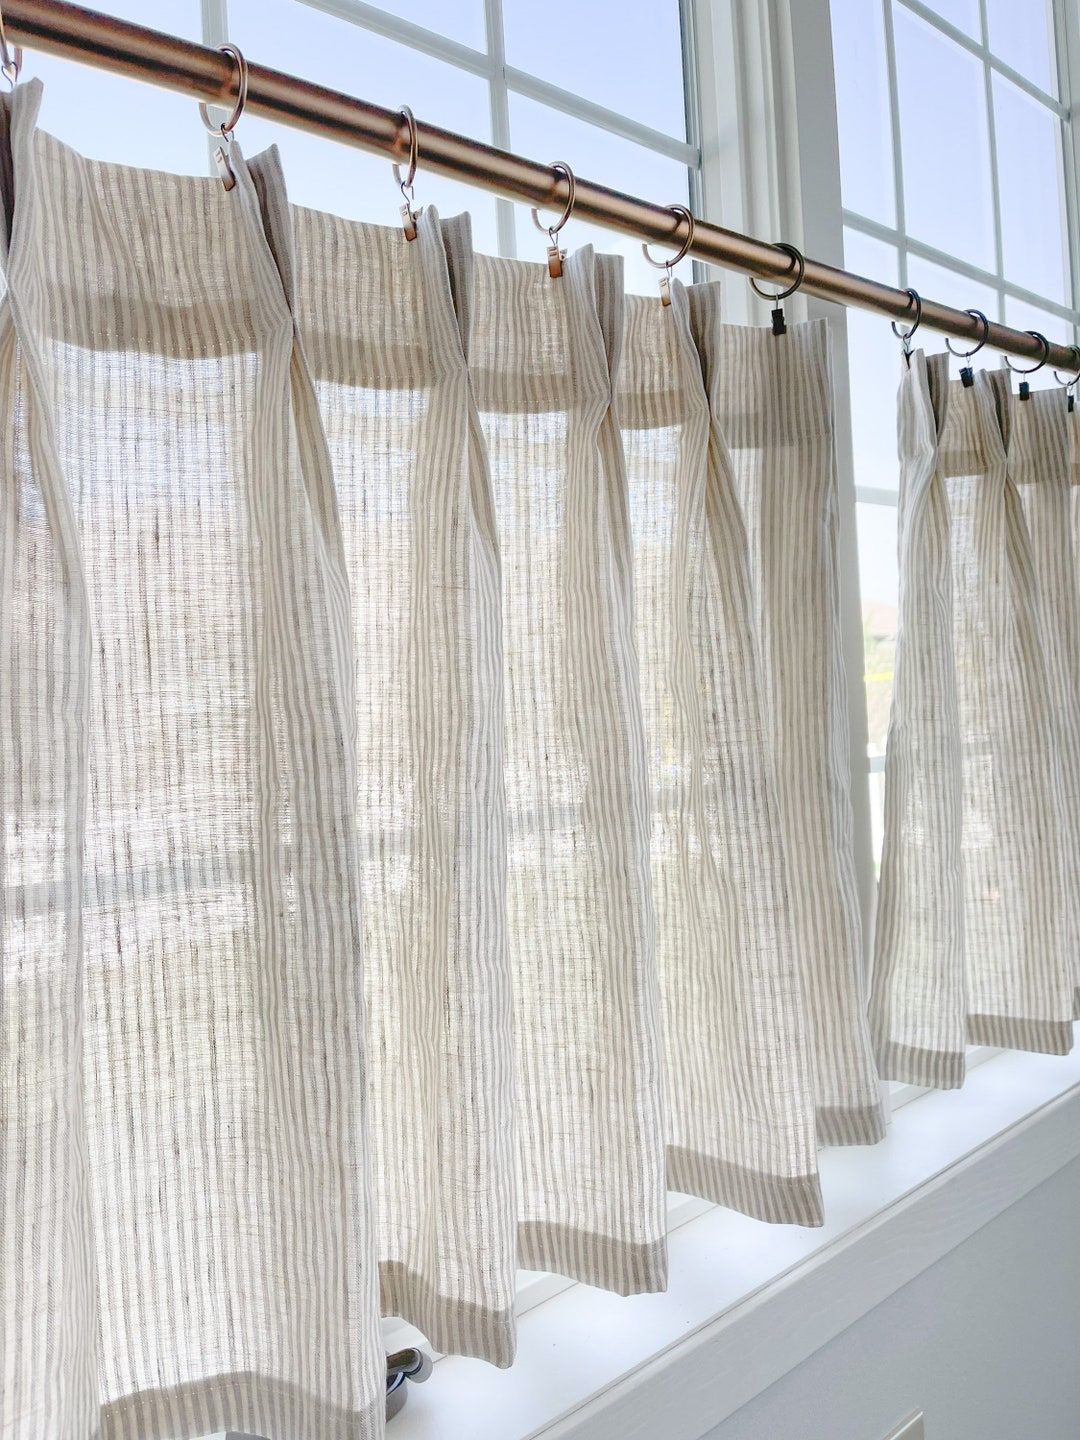 Kitchen Couture: Elevate Your Space with Kitchen Curtains